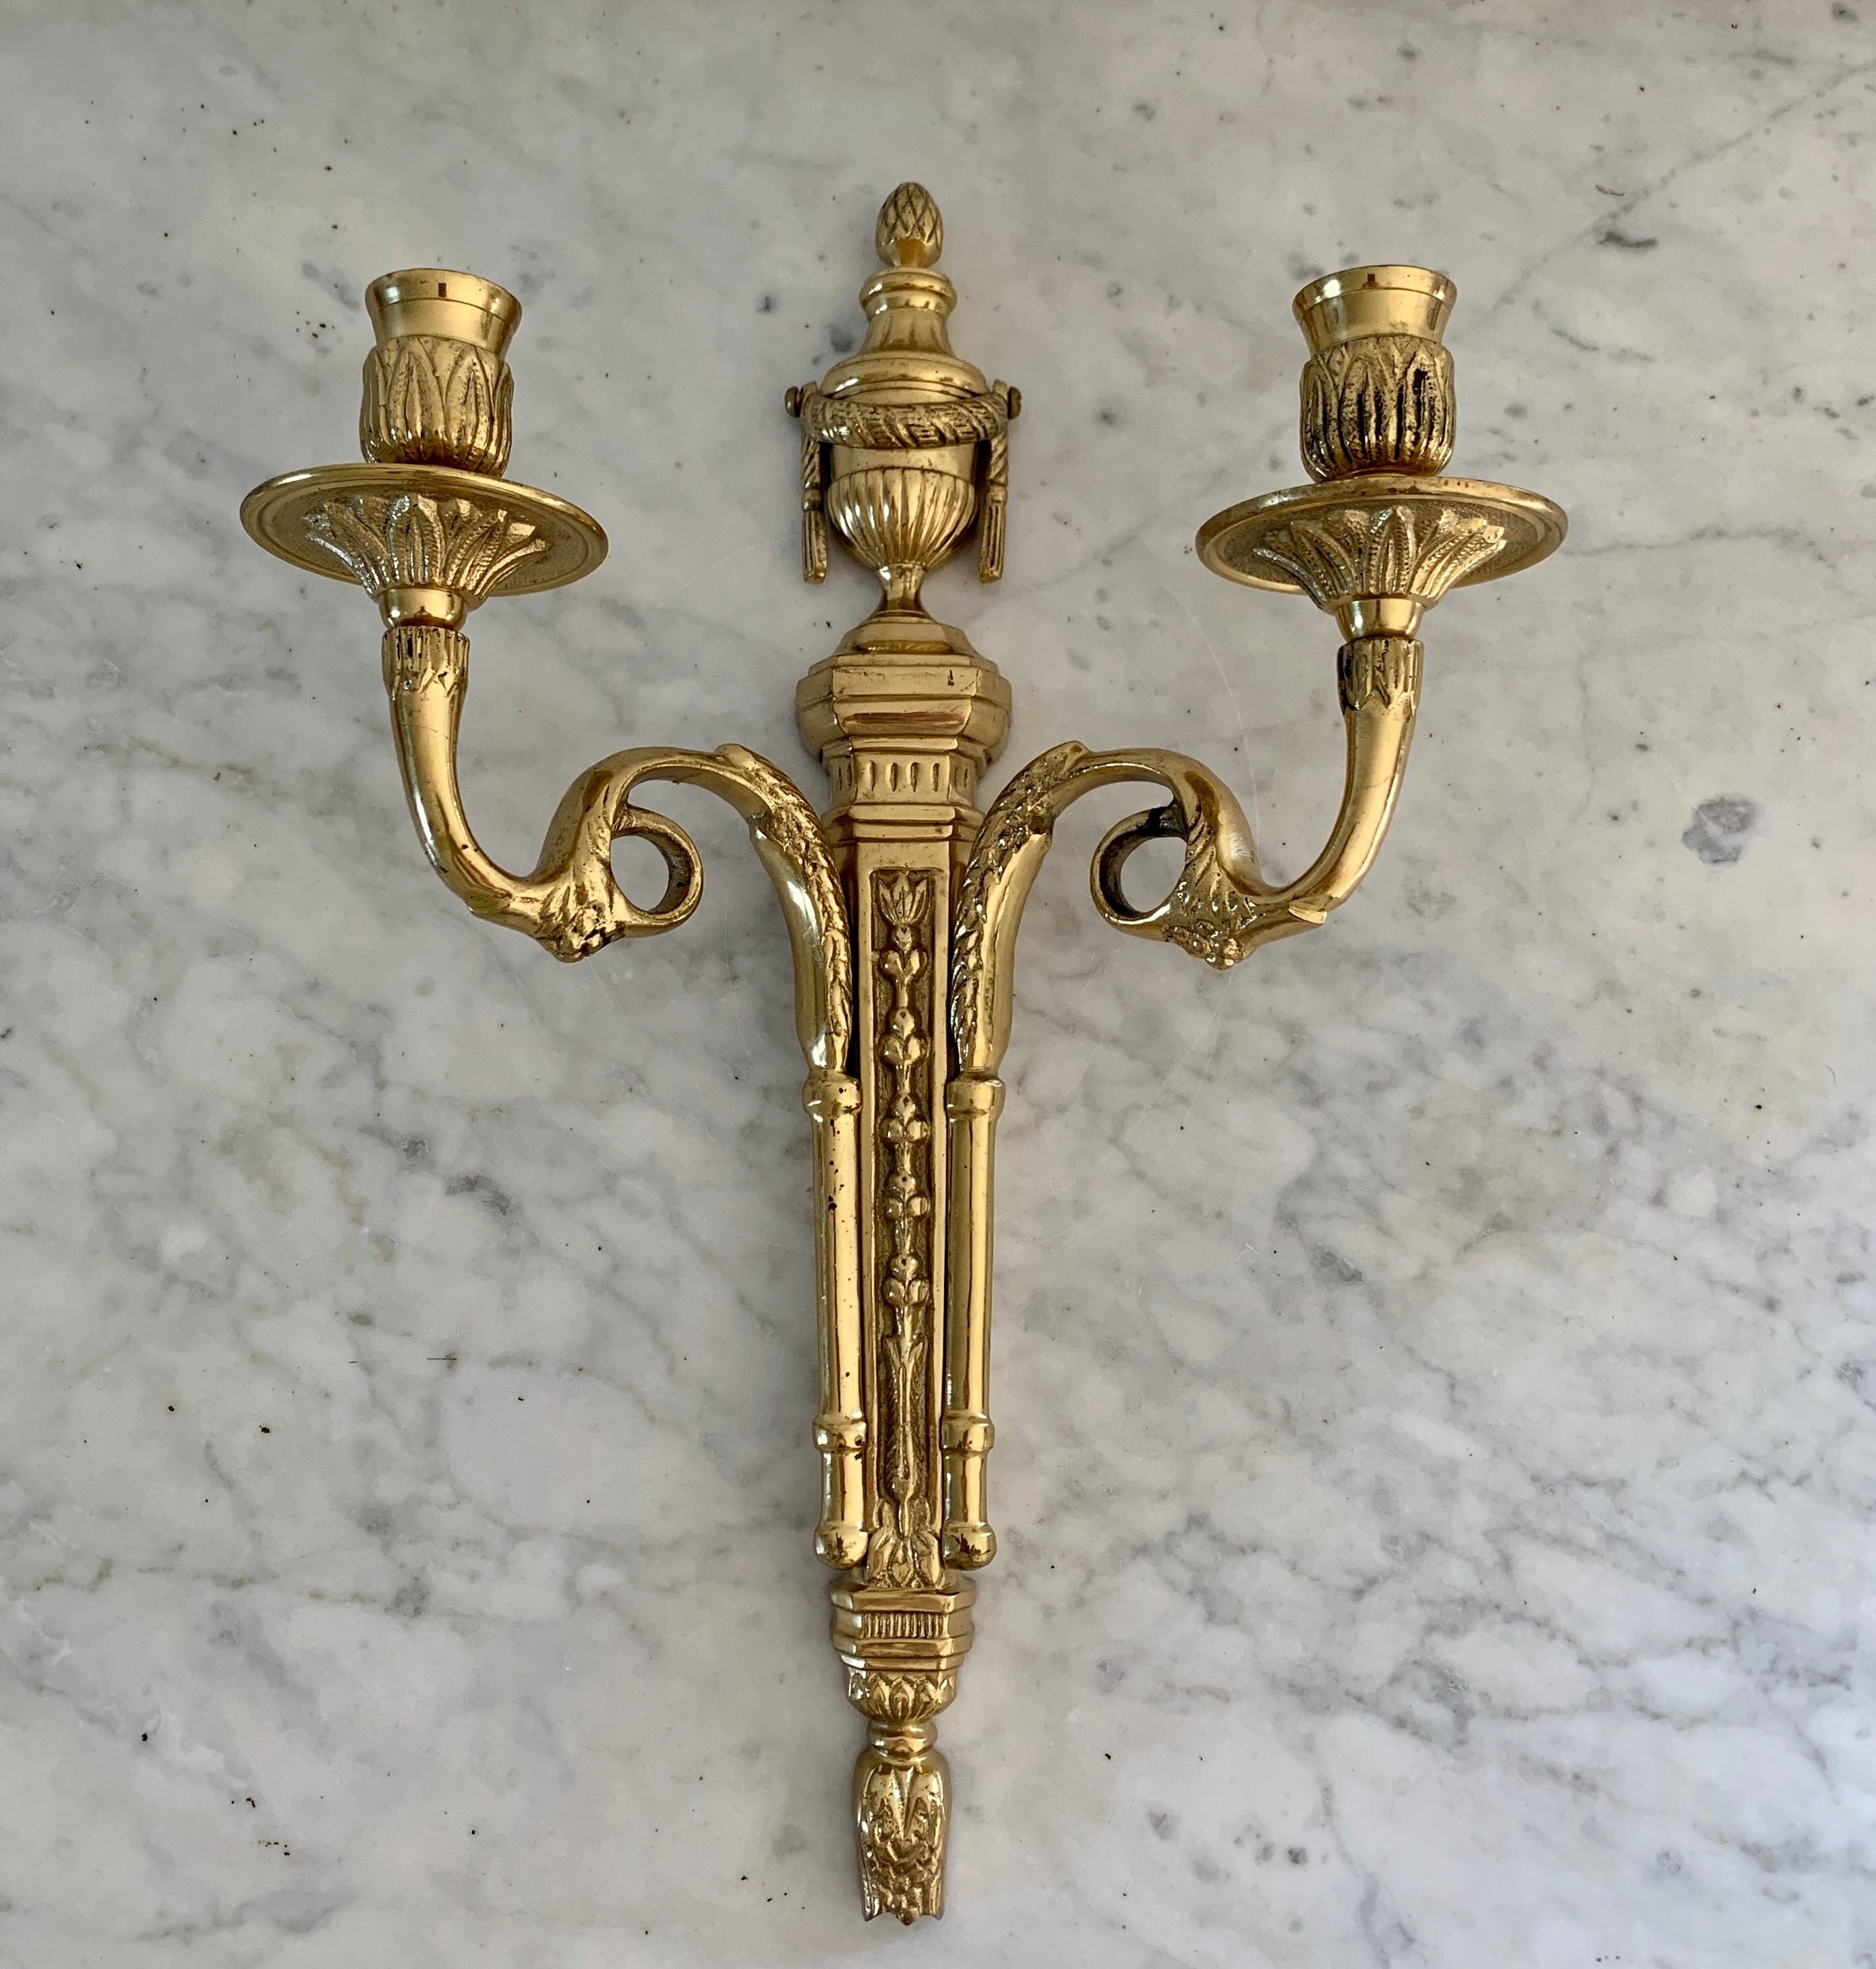 A gorgeous Neoclassical style brass candle sconce.

Circa mid-20th century.

Measures: 9.5